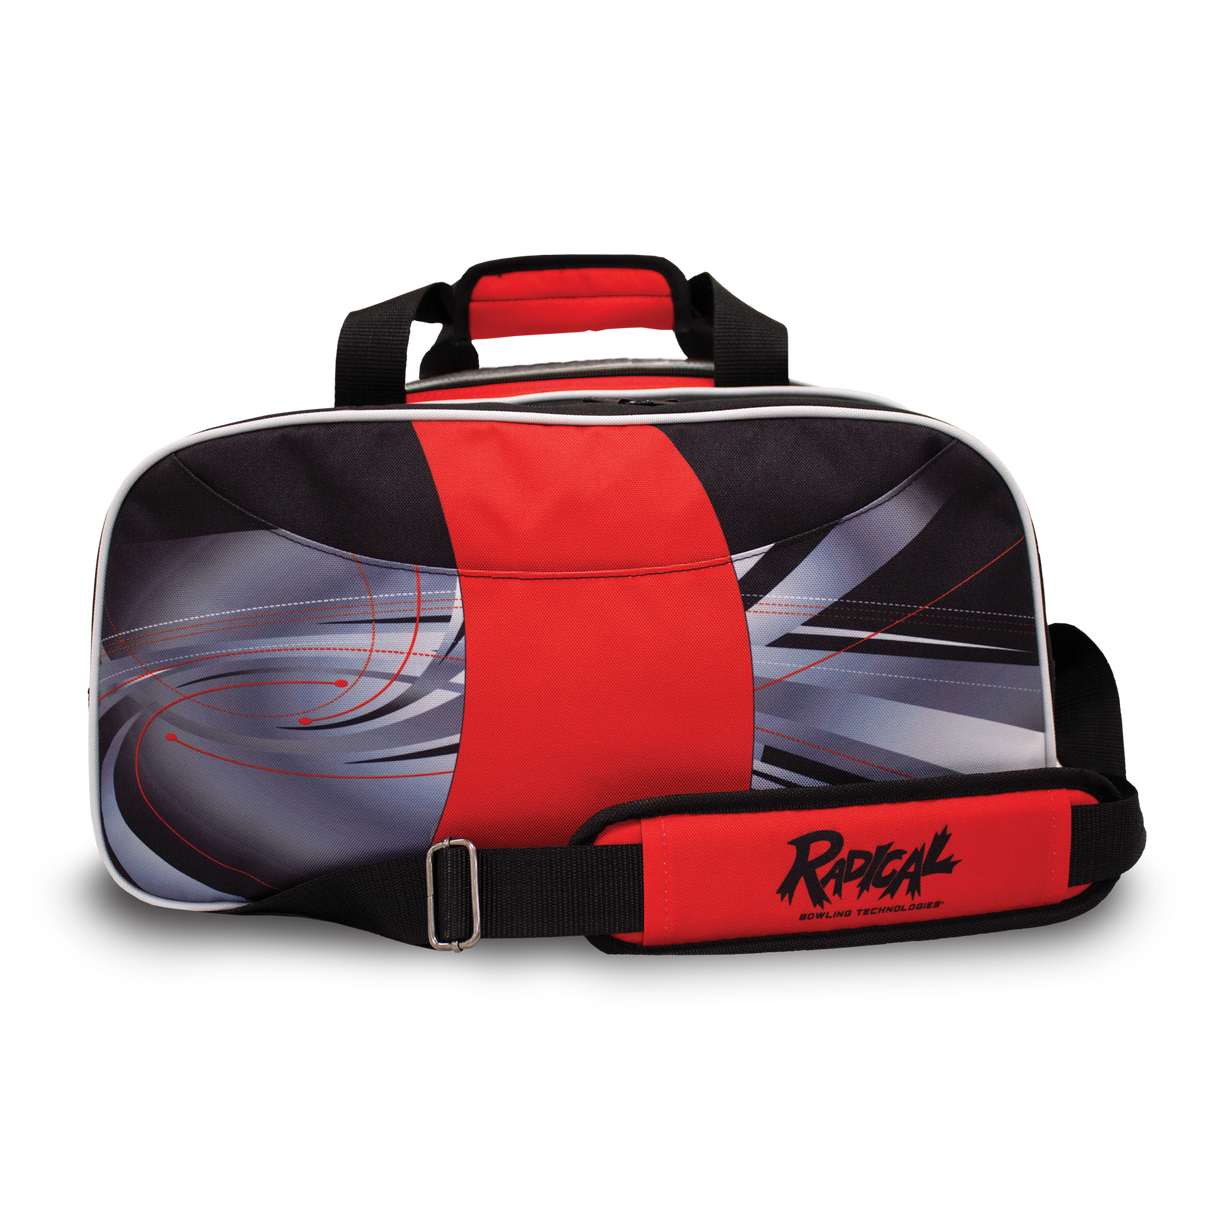 radical two ball double tote bowling bag shoes travel